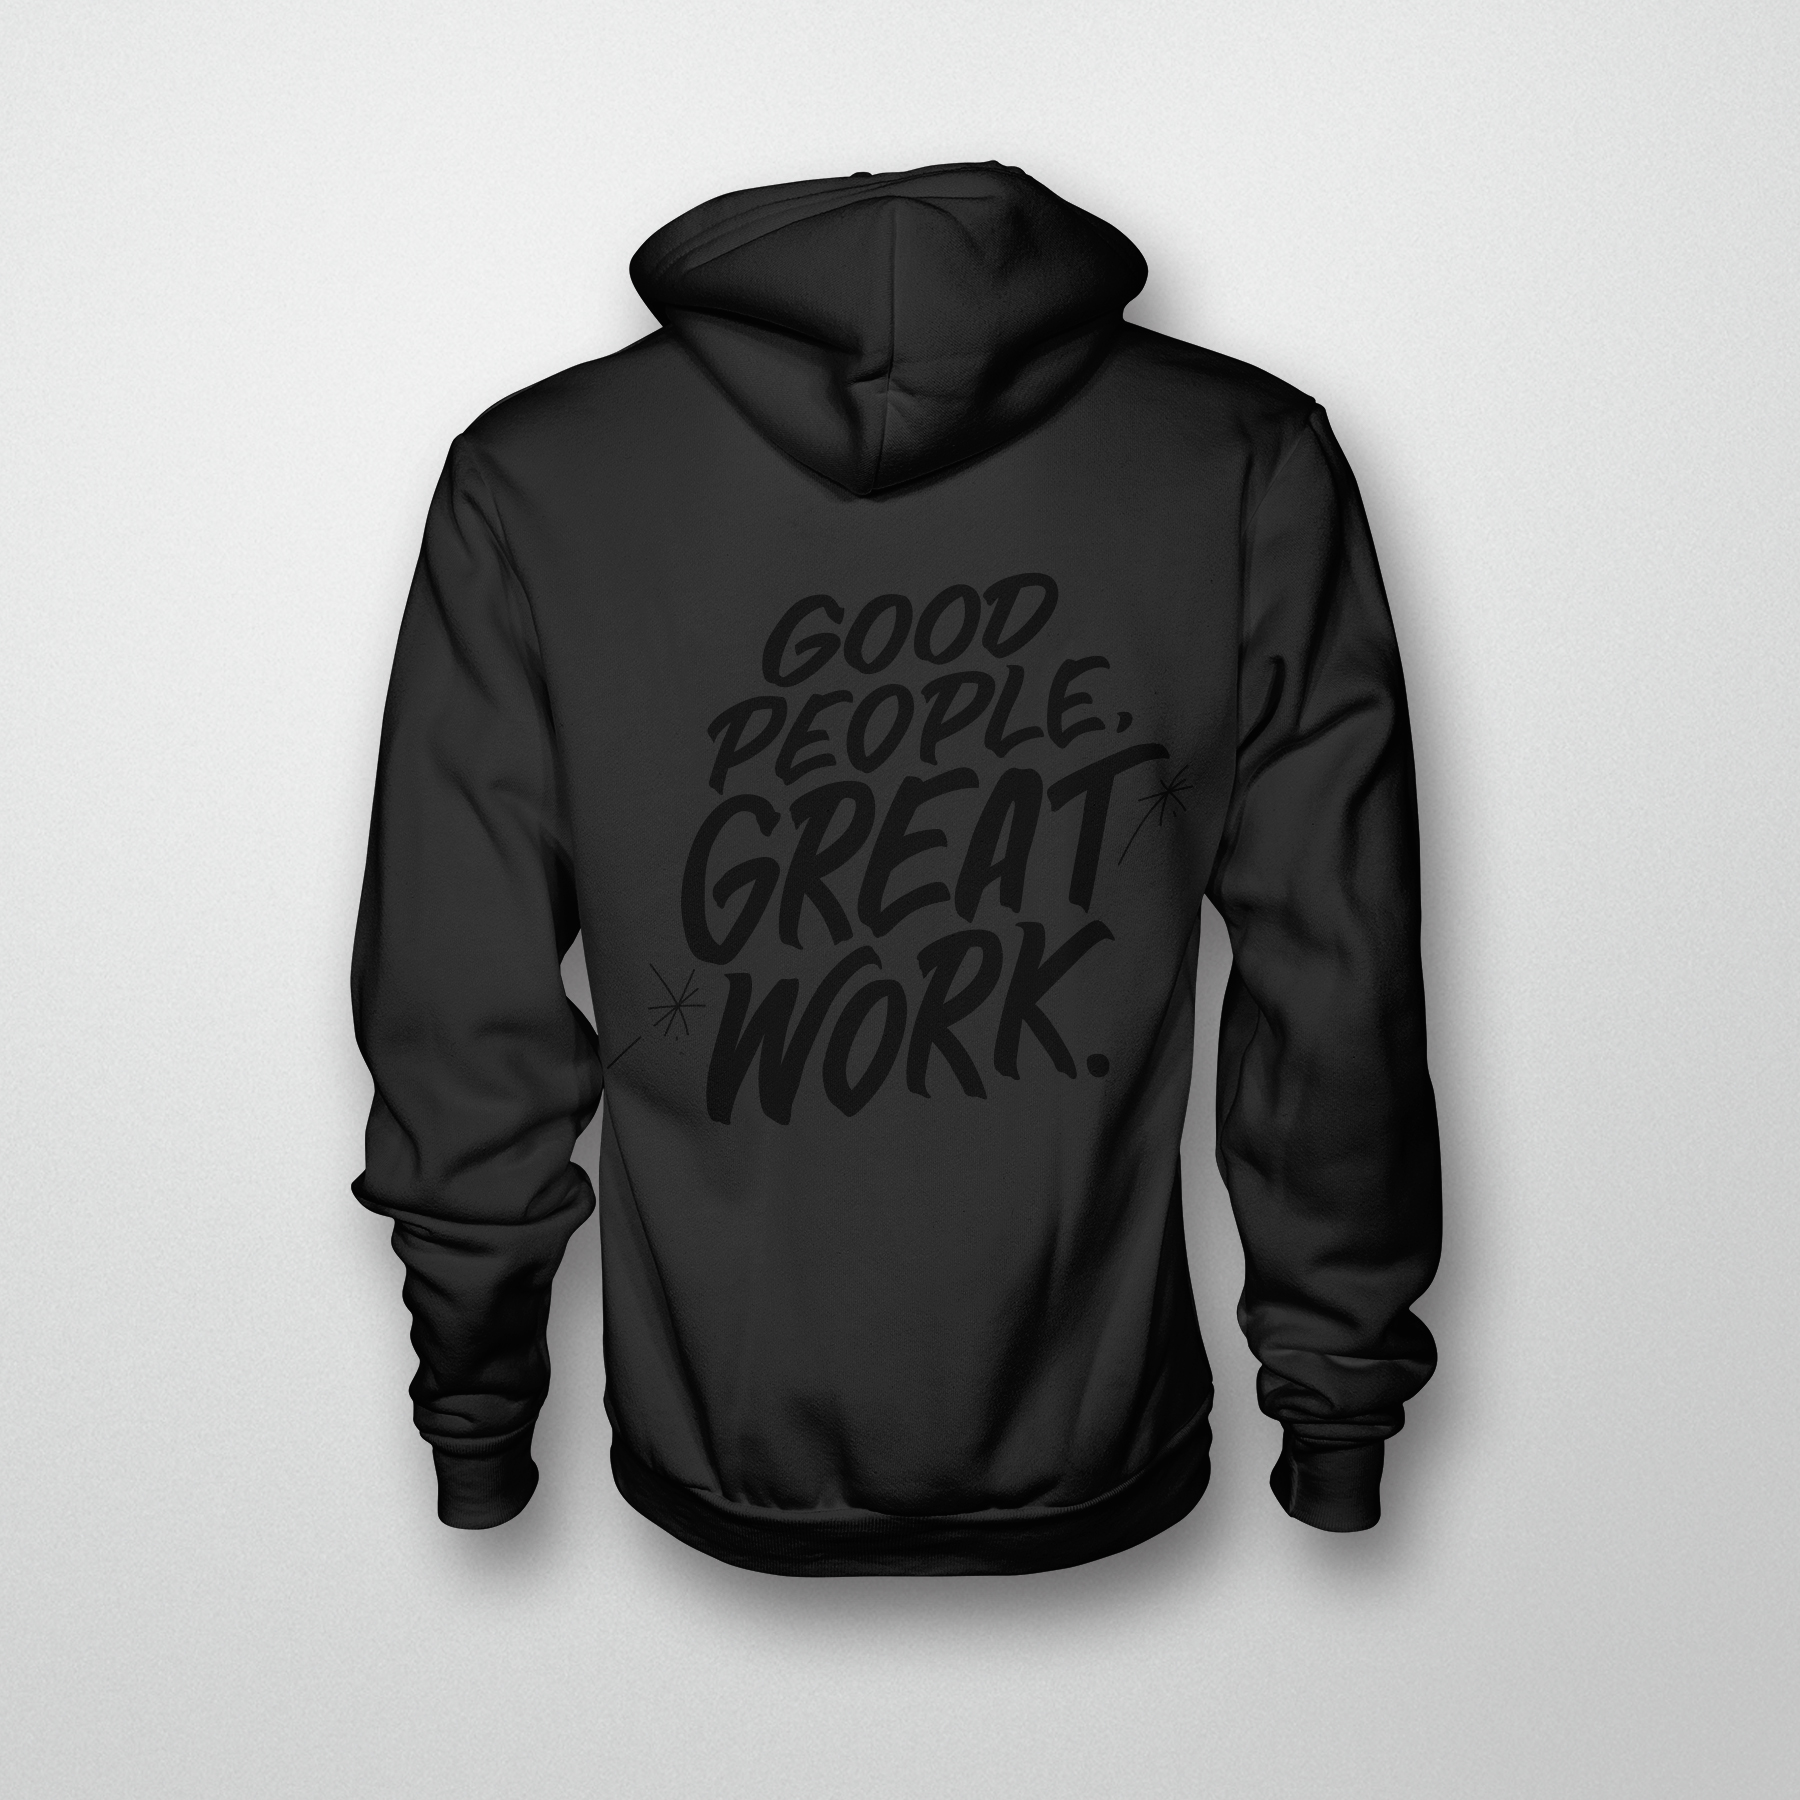 A black hoodie with shiny black text in the style of Honest Eds reads Good people great work.